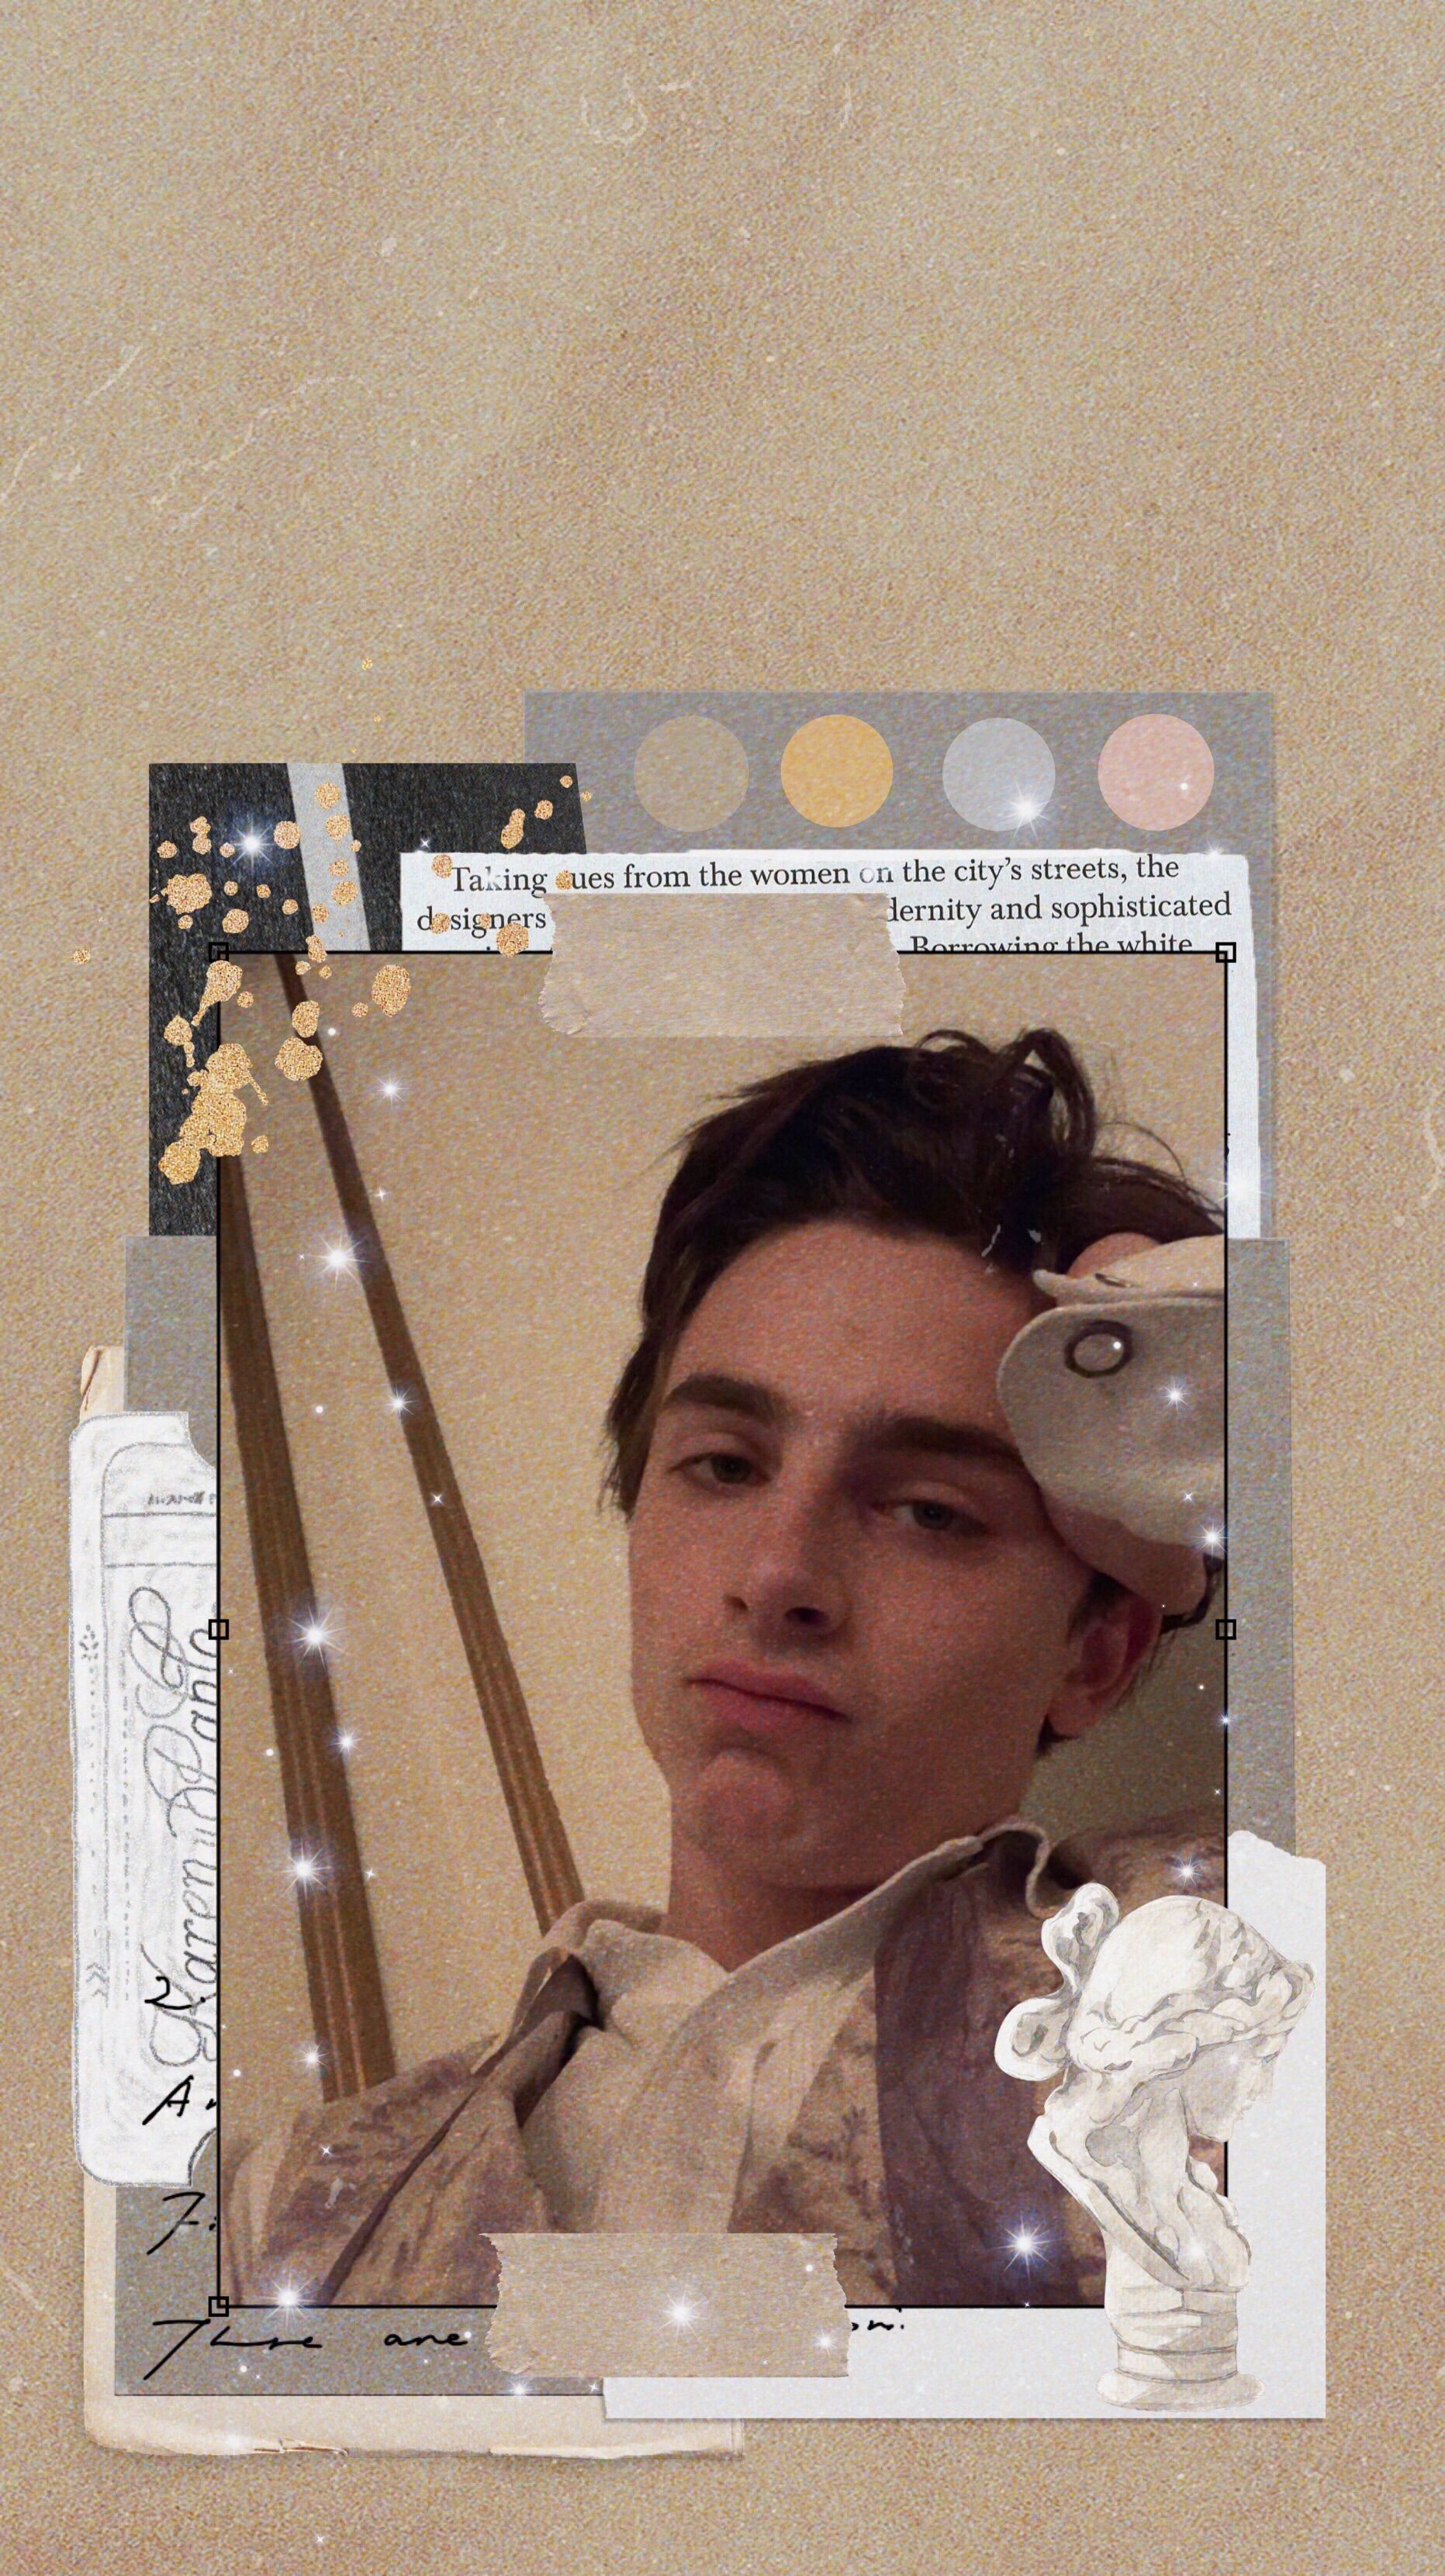 Collage of the author, an artist, with a quote about designers and the city. - Timothee Chalamet